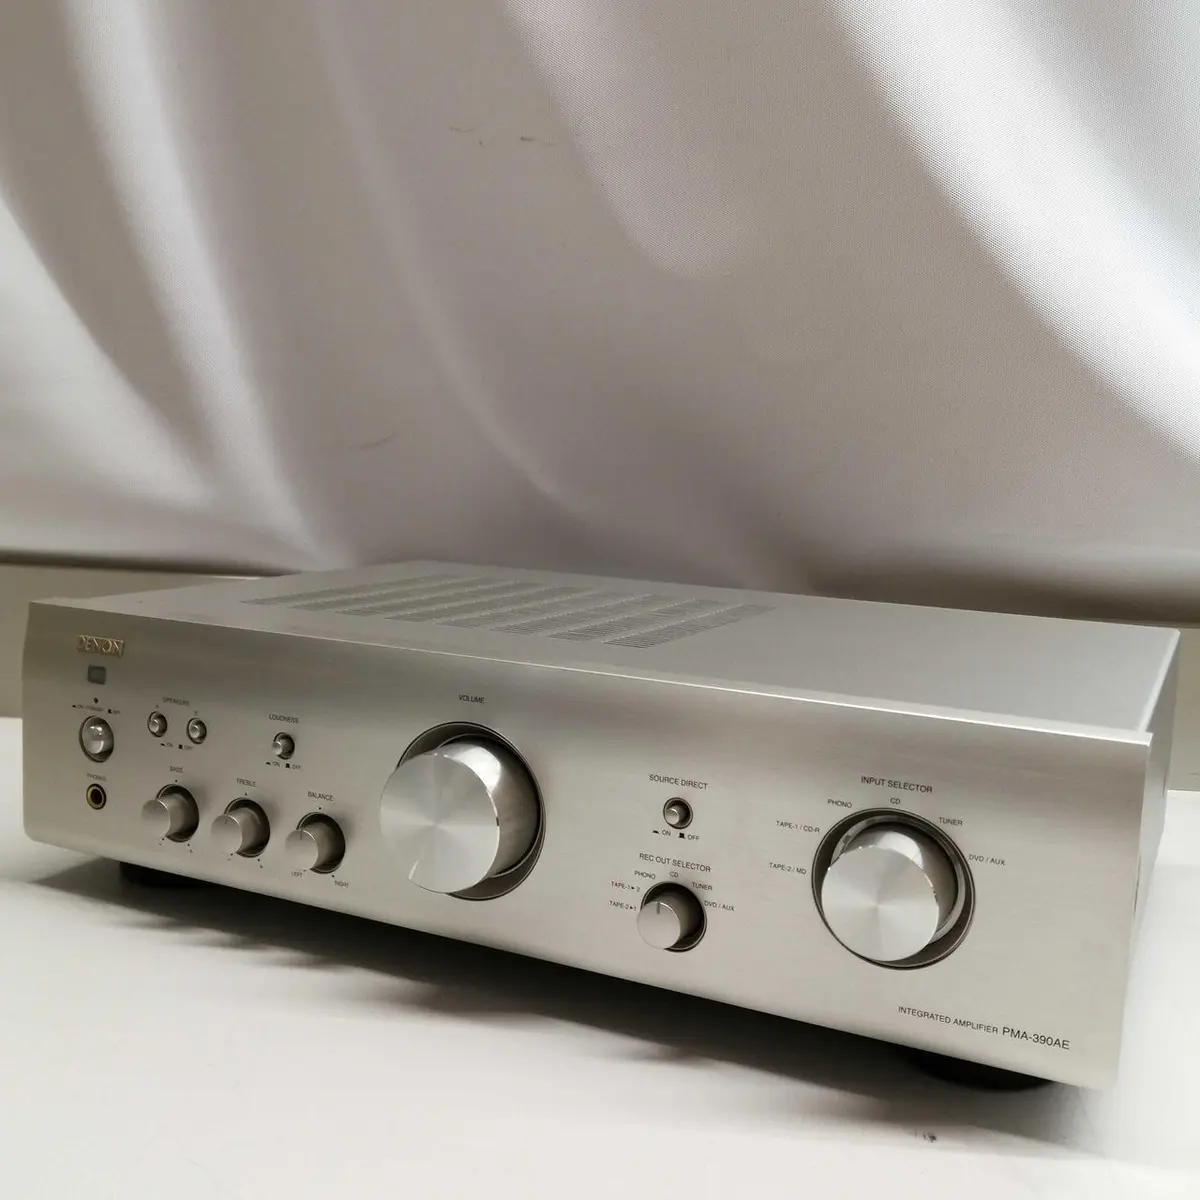 DENON PMA-390AE Integrated Amplifier Used from Japan in Good Condition